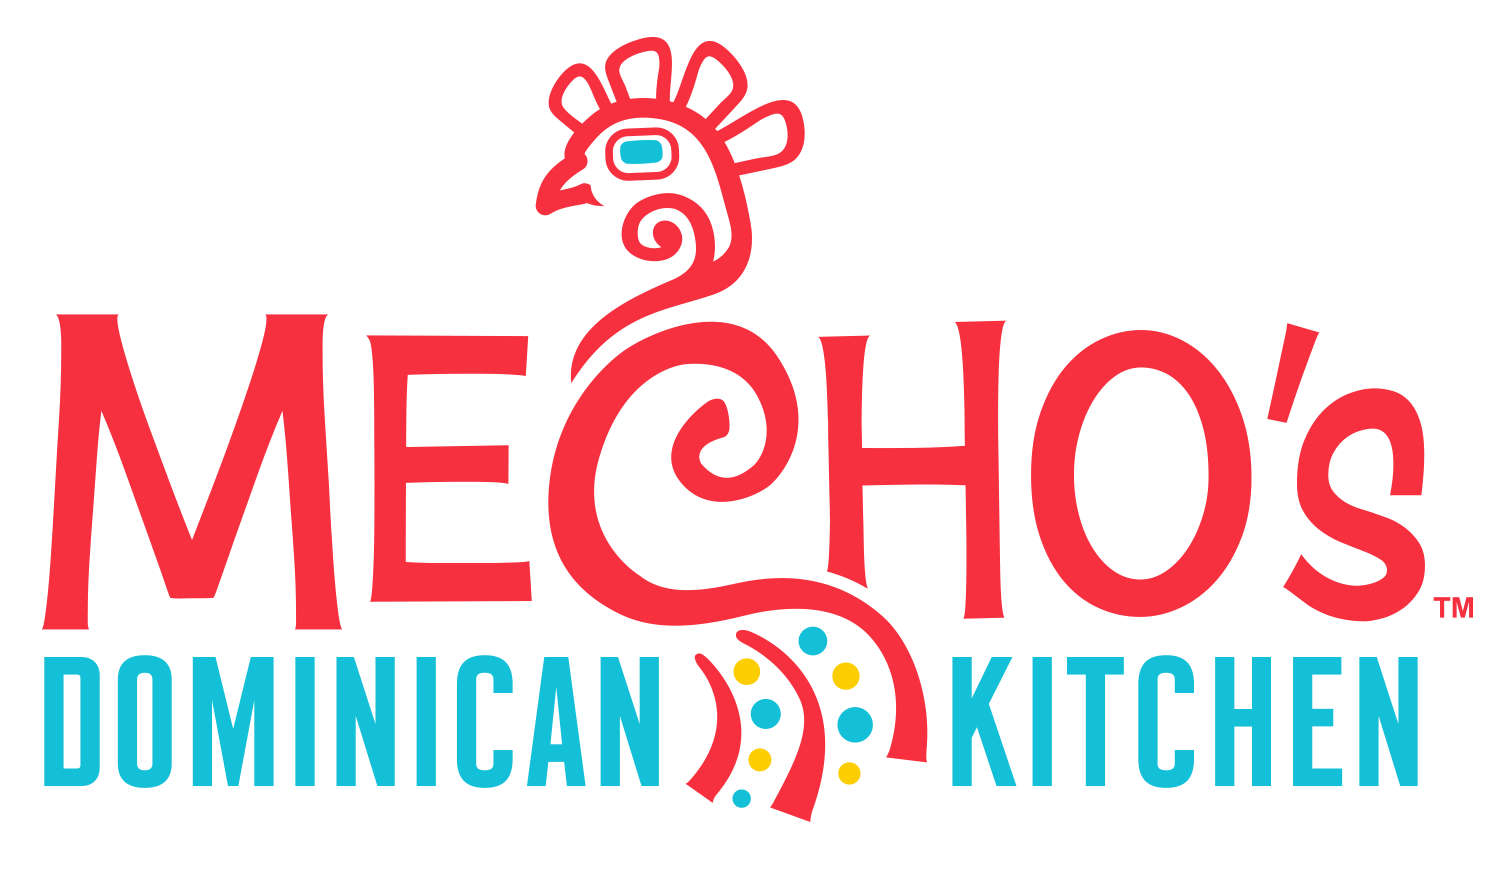 New Caribbean Fast Casual Restaurant Concept Premiers In Dc Mecho S Dominican Kitchen